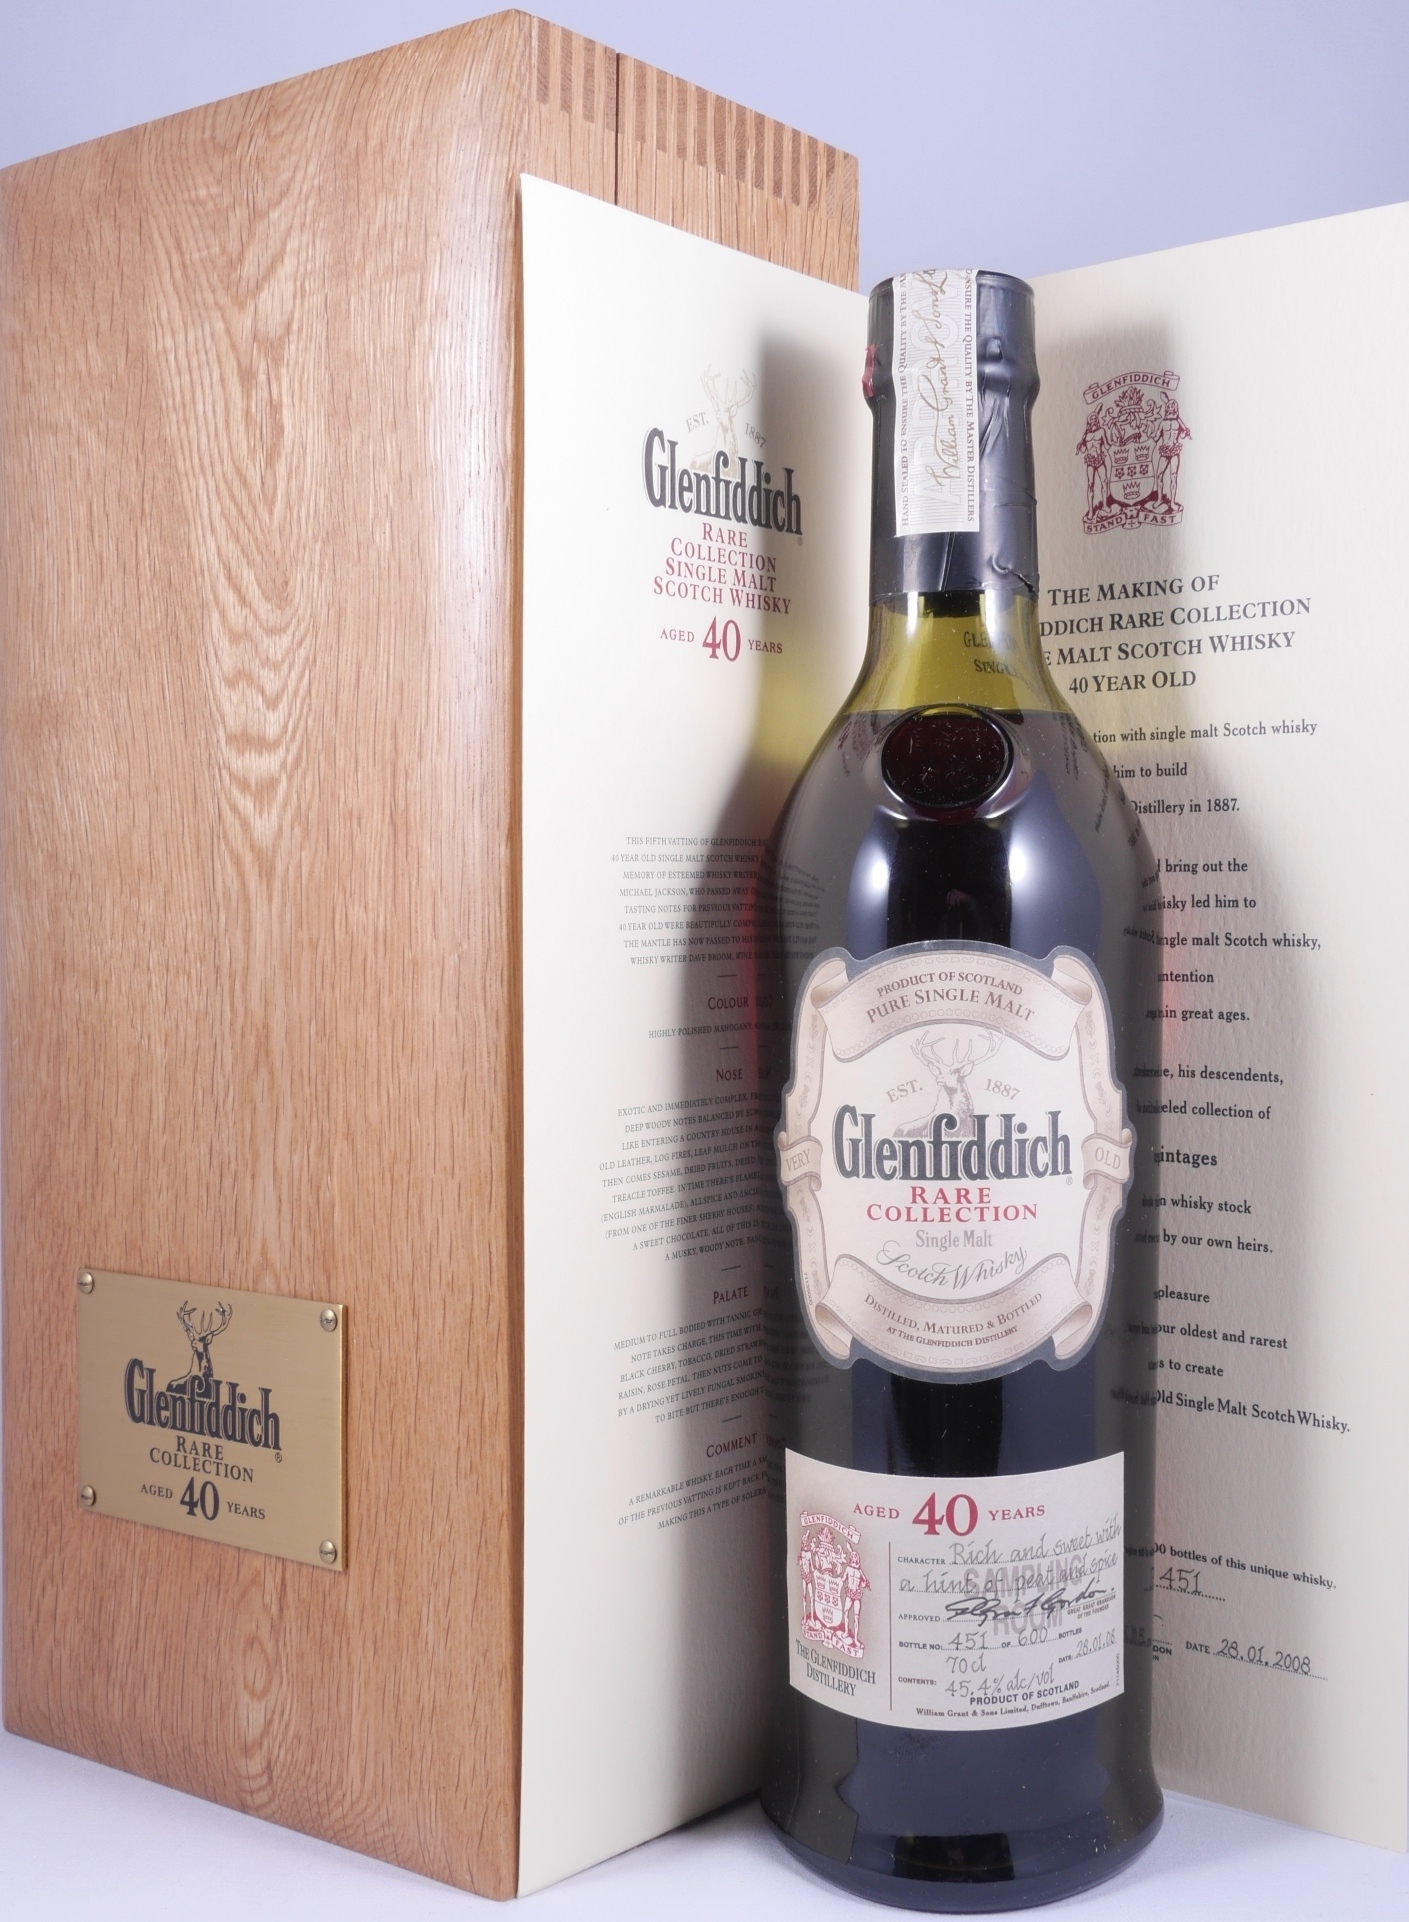 Buy Glenfiddich 40 Years-old Rare Collection Release 2008 Speyside Pure Single  Malt Scotch Whisky Wooden Box 45.4% ABV at AmCom secure online